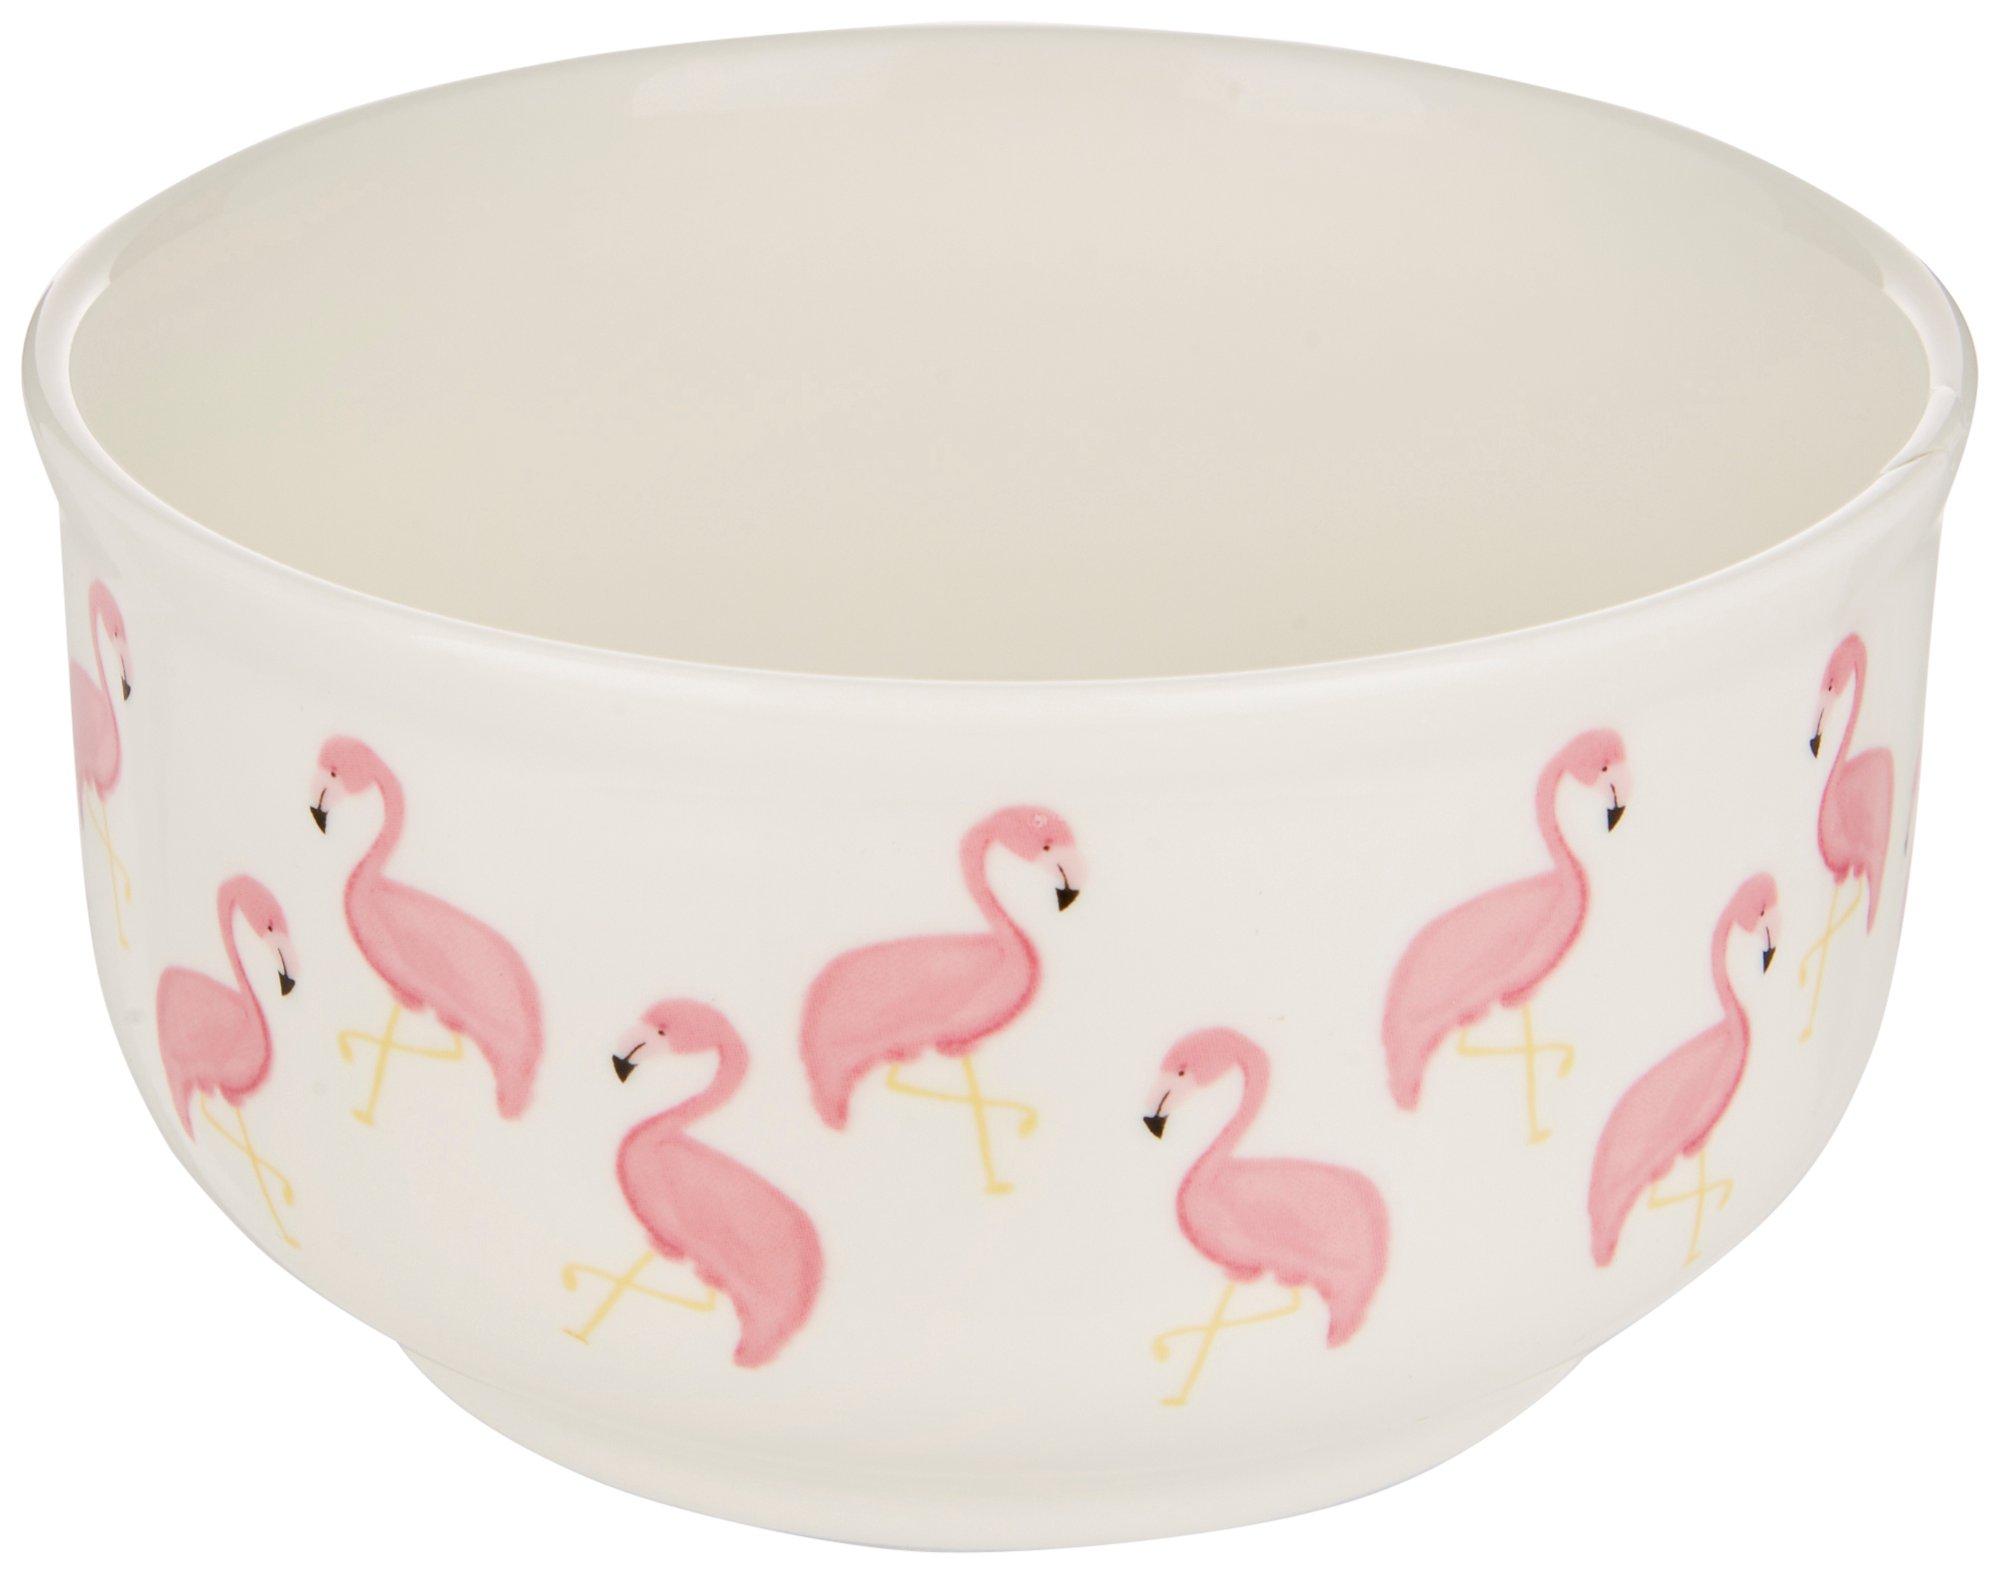 Eccolo Flamingo Pattern Vented Microwaveable Container